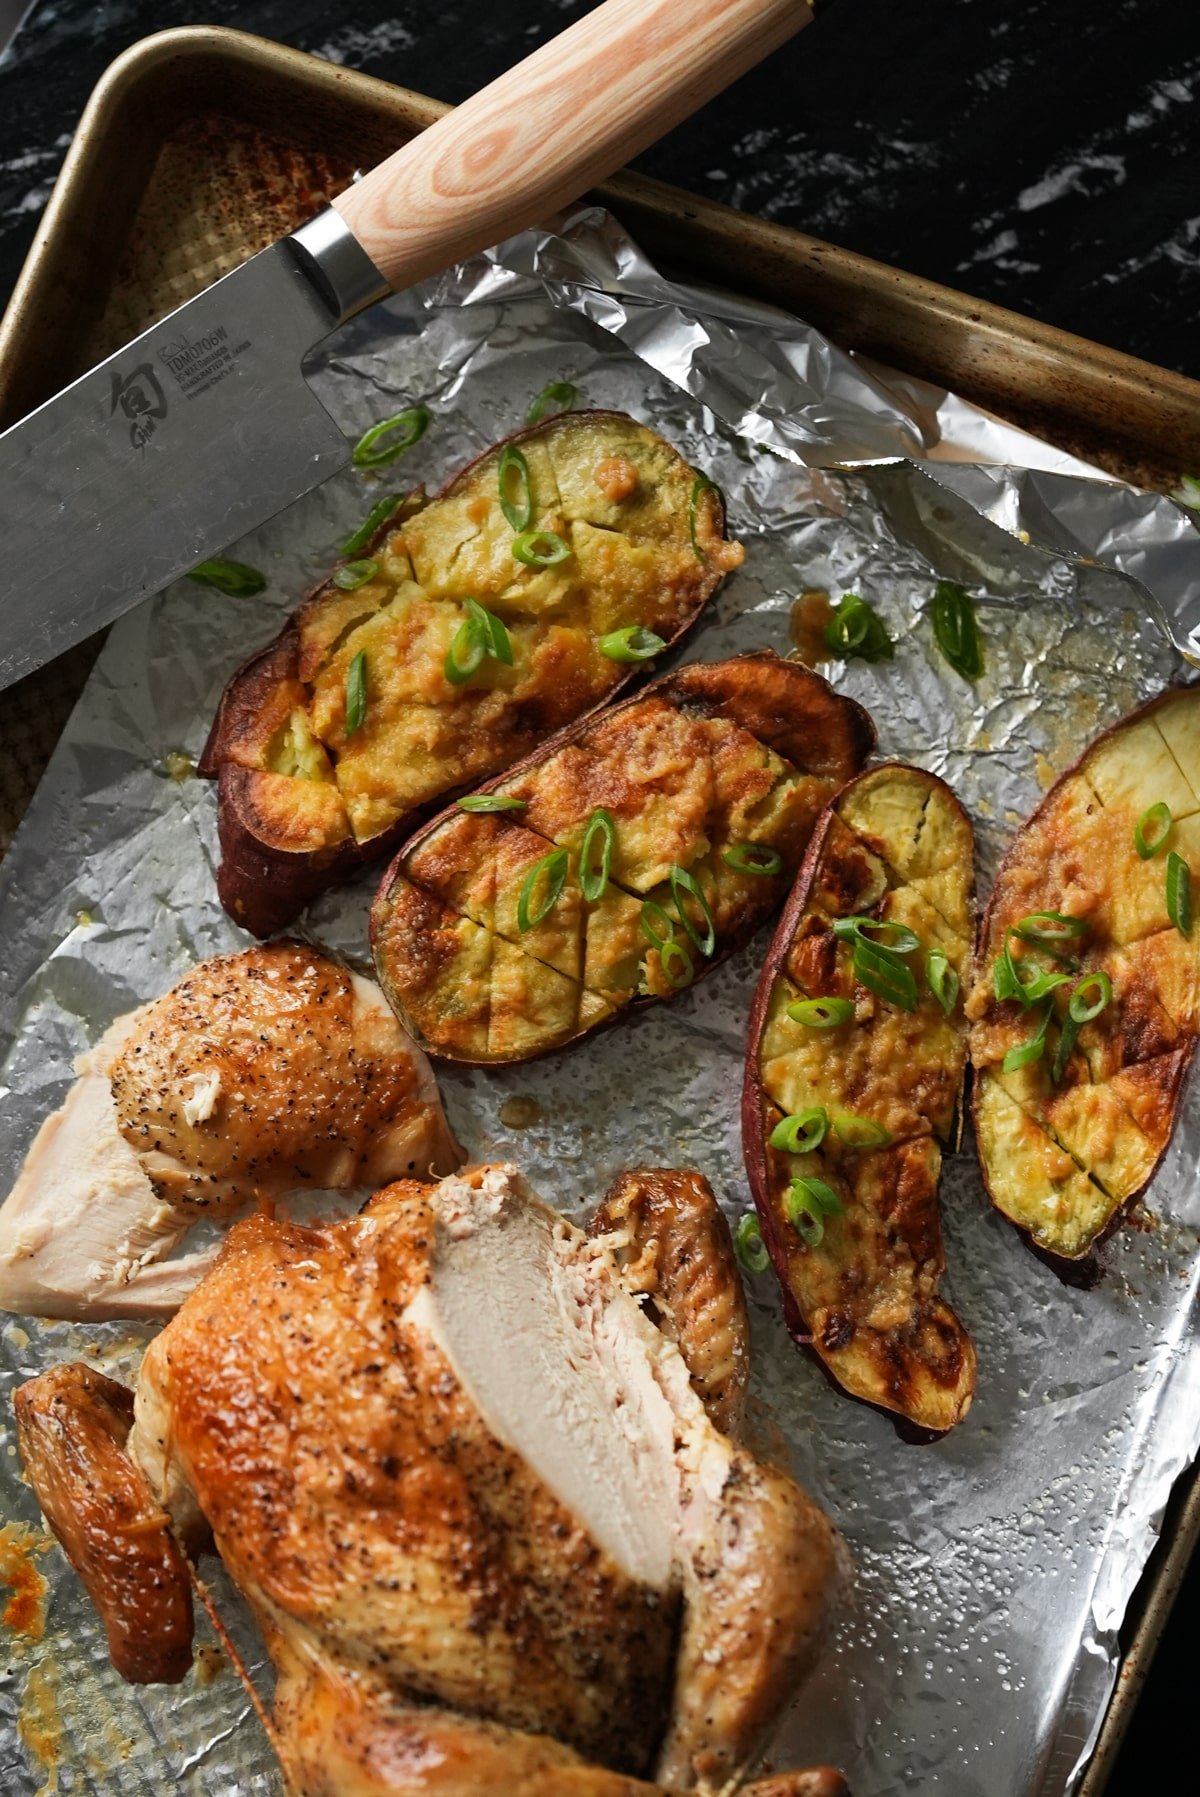 Roasted Japanese sweet potatoes with miso butter and fresh scallions and a roast chicken on a baking tray